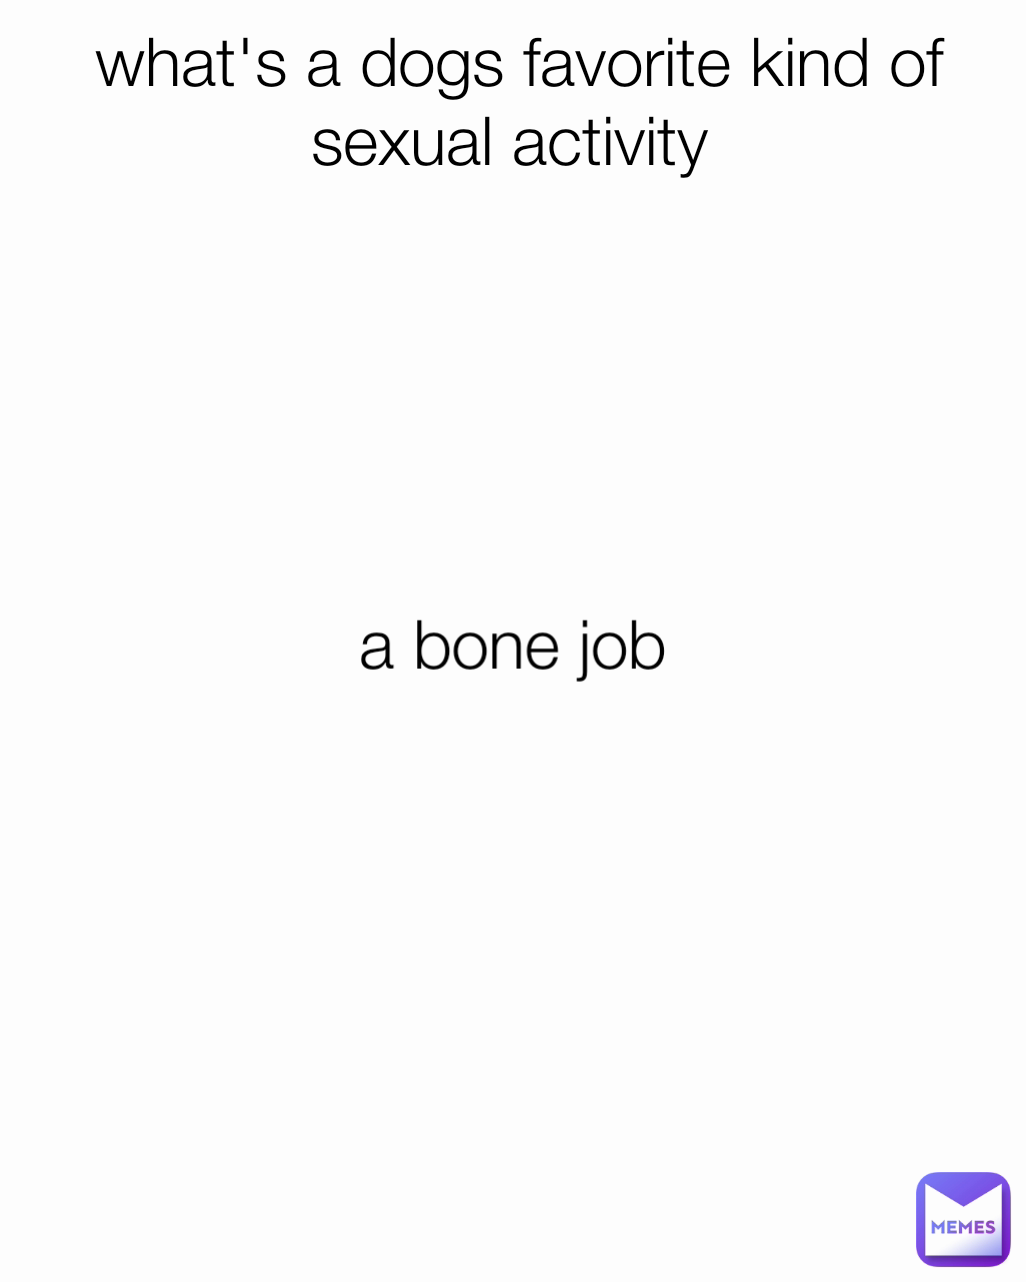 a bone job what's a dogs favorite kind of sexual activity 

a bone job